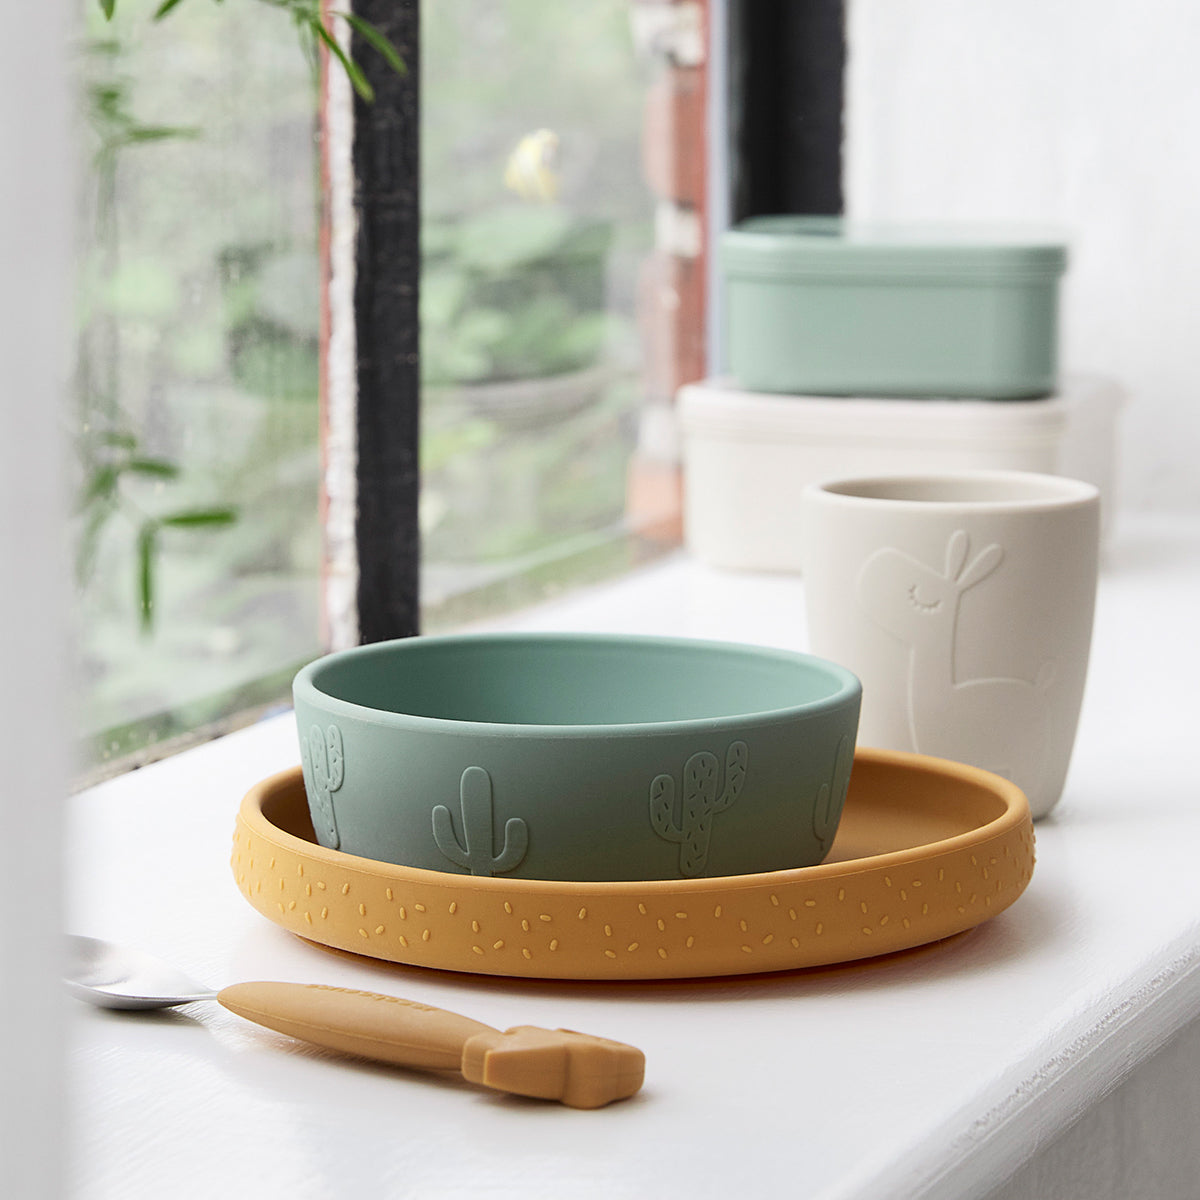 Stick & Stay dinner set - Lalee - Colour mix - Lifestyle